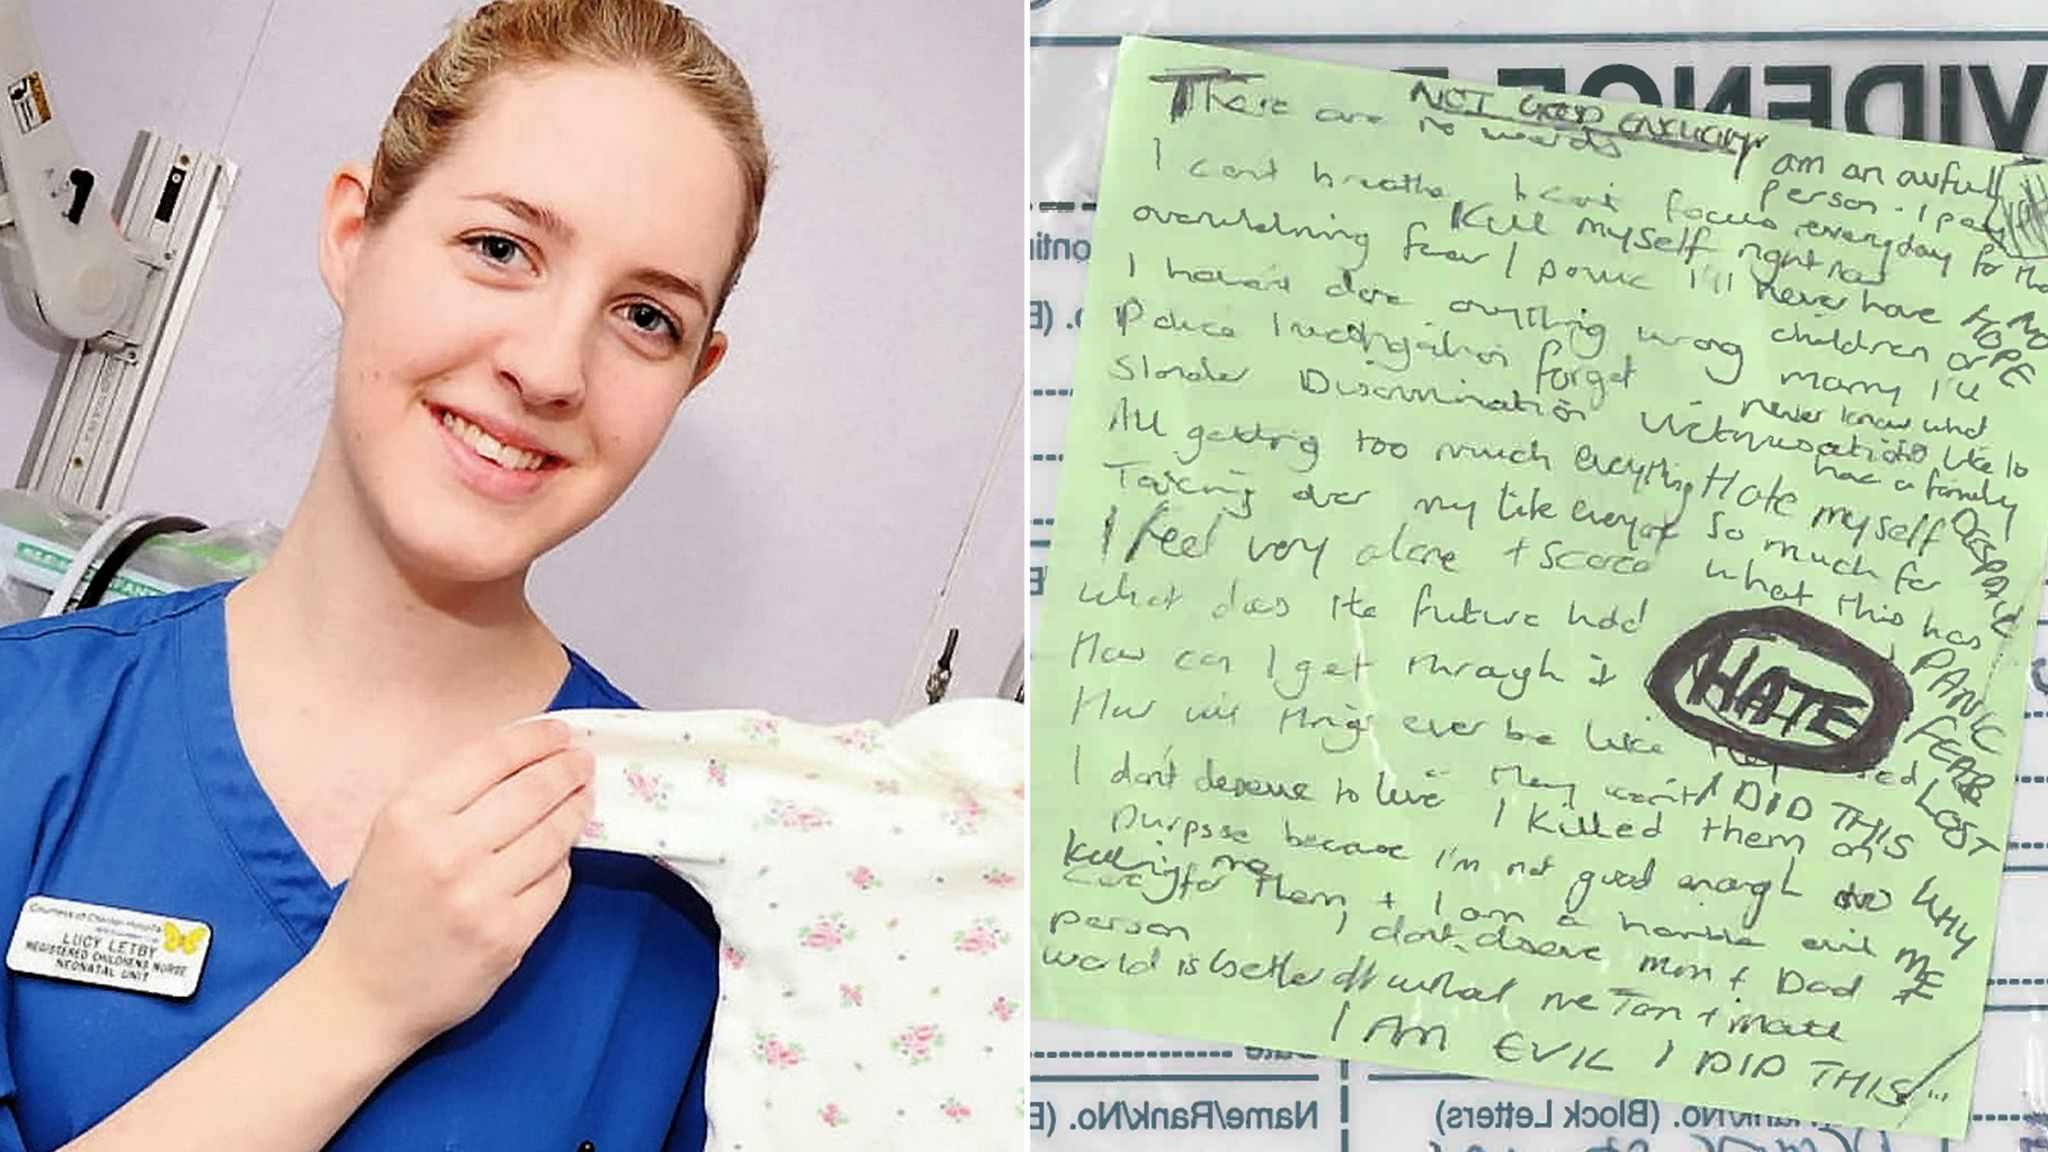 Lucy Letby trial - 'I am evil, I did this': Read the 'confession note'  written by nurse accused of murdering seven babies | UK News | Sky News